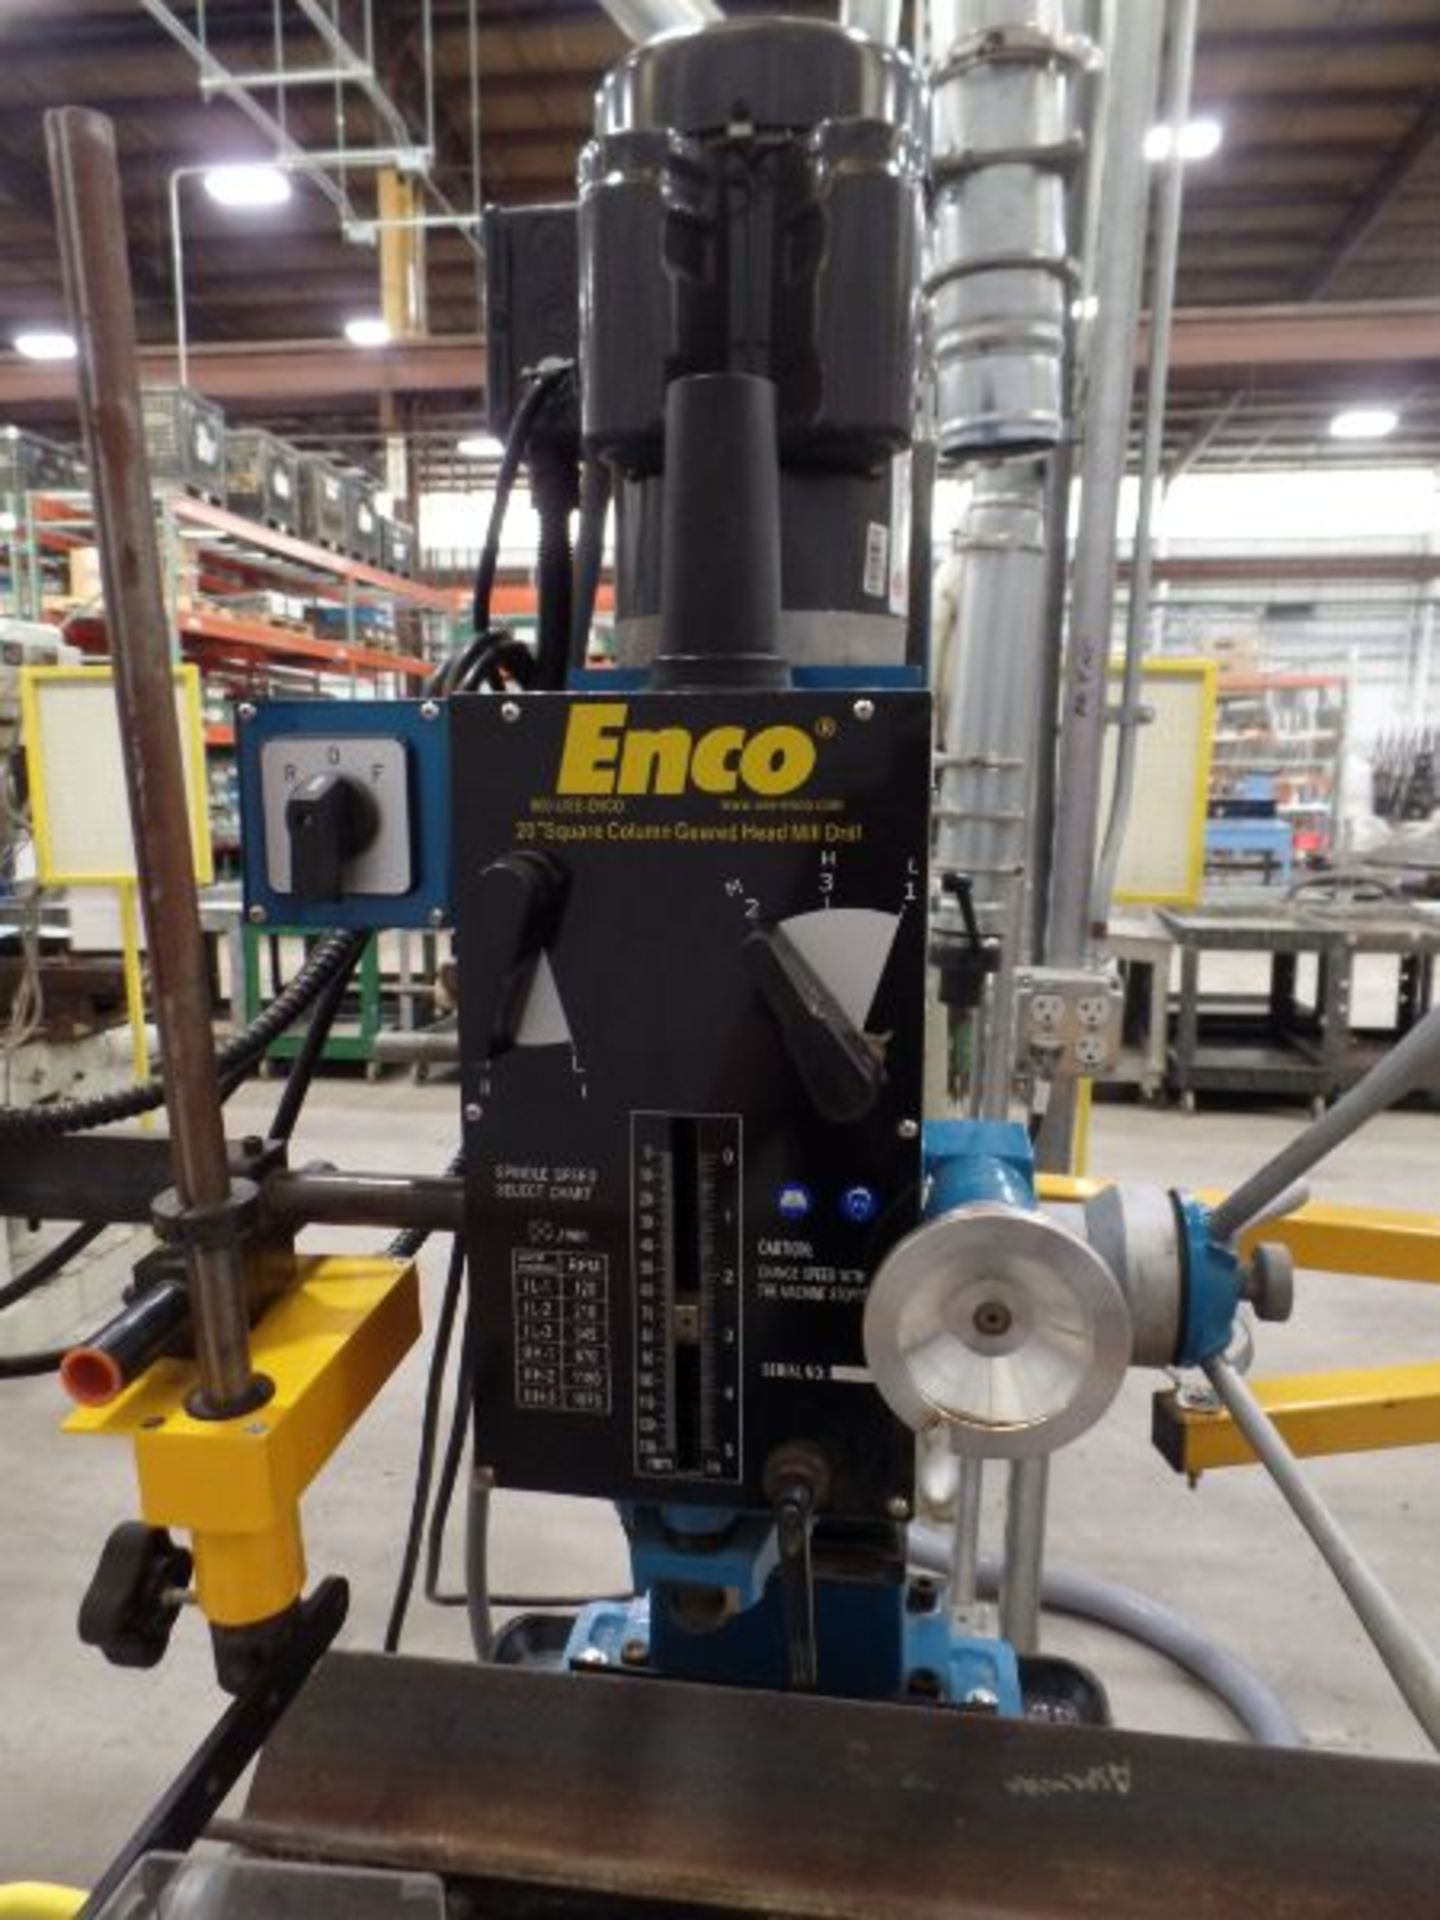 Enco 405-0593 20" Square Column Geared Head Mill, 9" x 31" Table, s/n 24041805057, New 2018 - Image 4 of 6